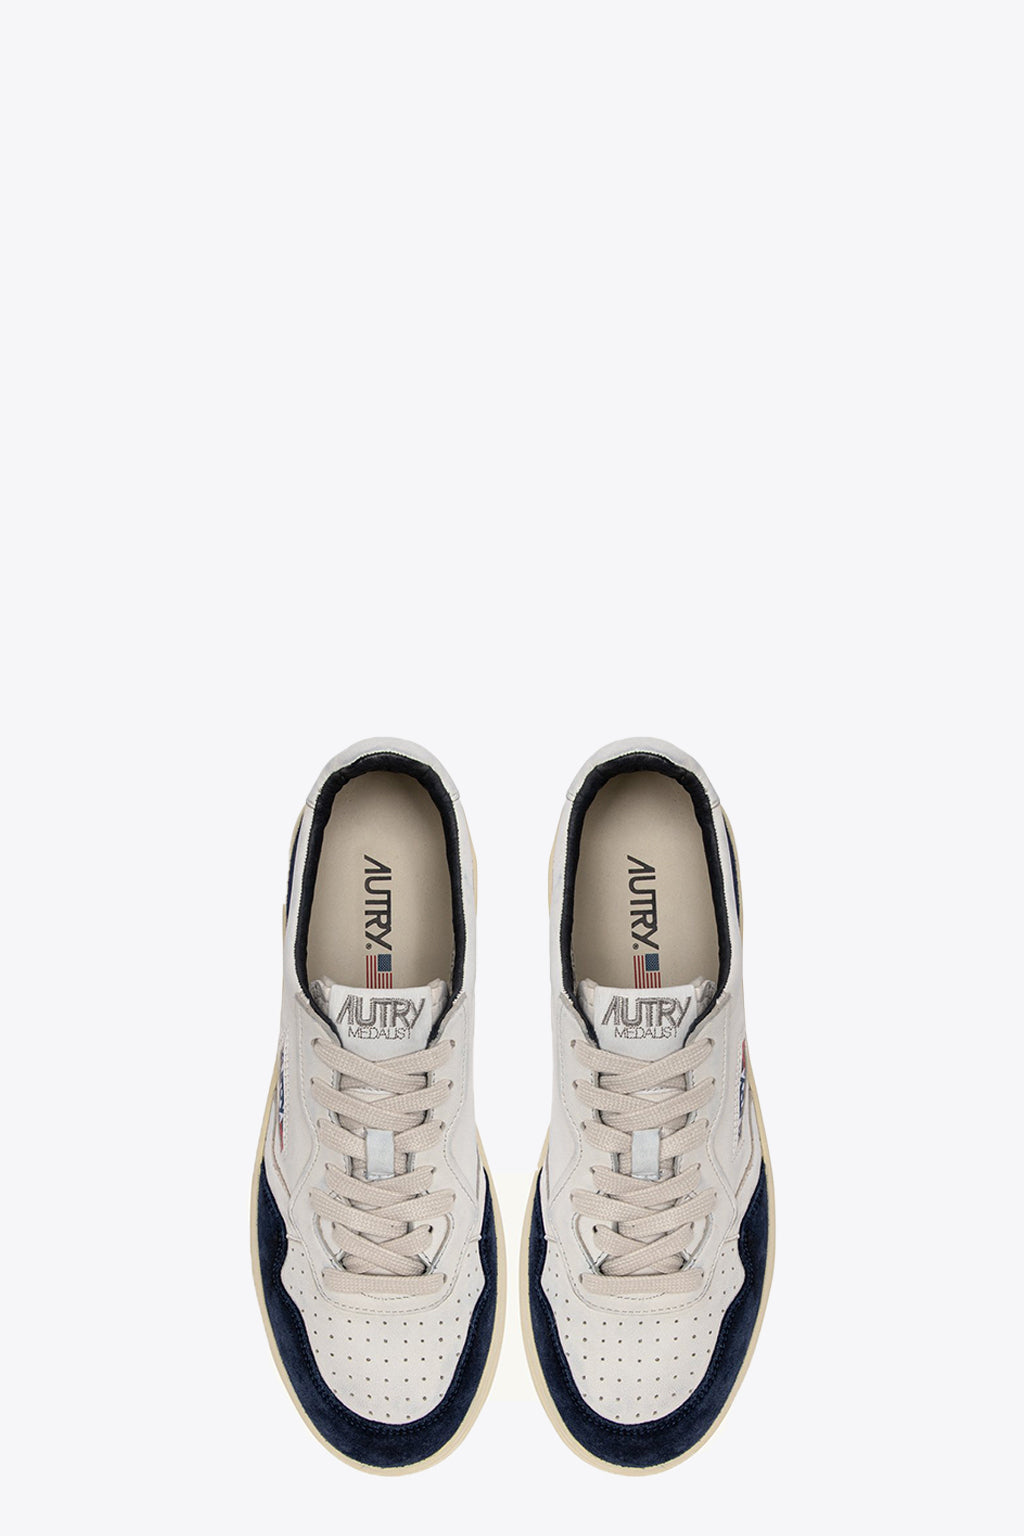 alt-image__White-leather-low-sneaker-with-blue-suede-detail---Medalist